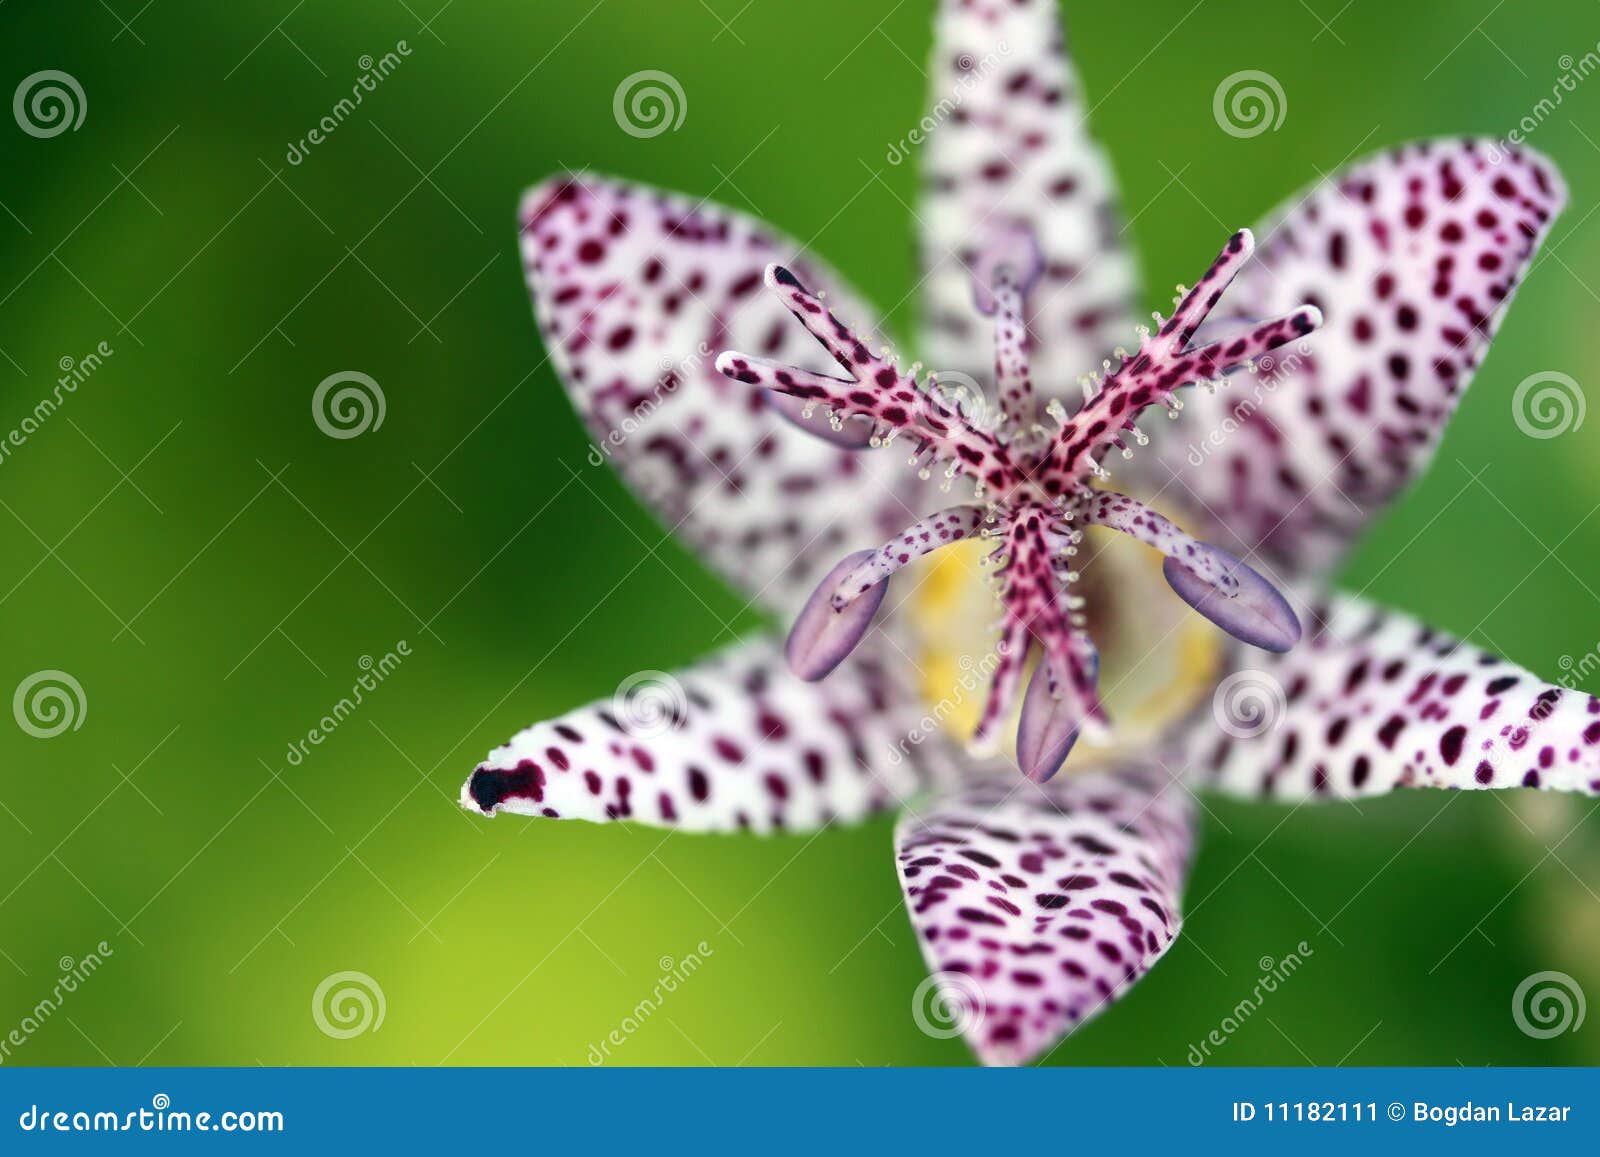 close-up on a toad lily (tricyrtis hirta)